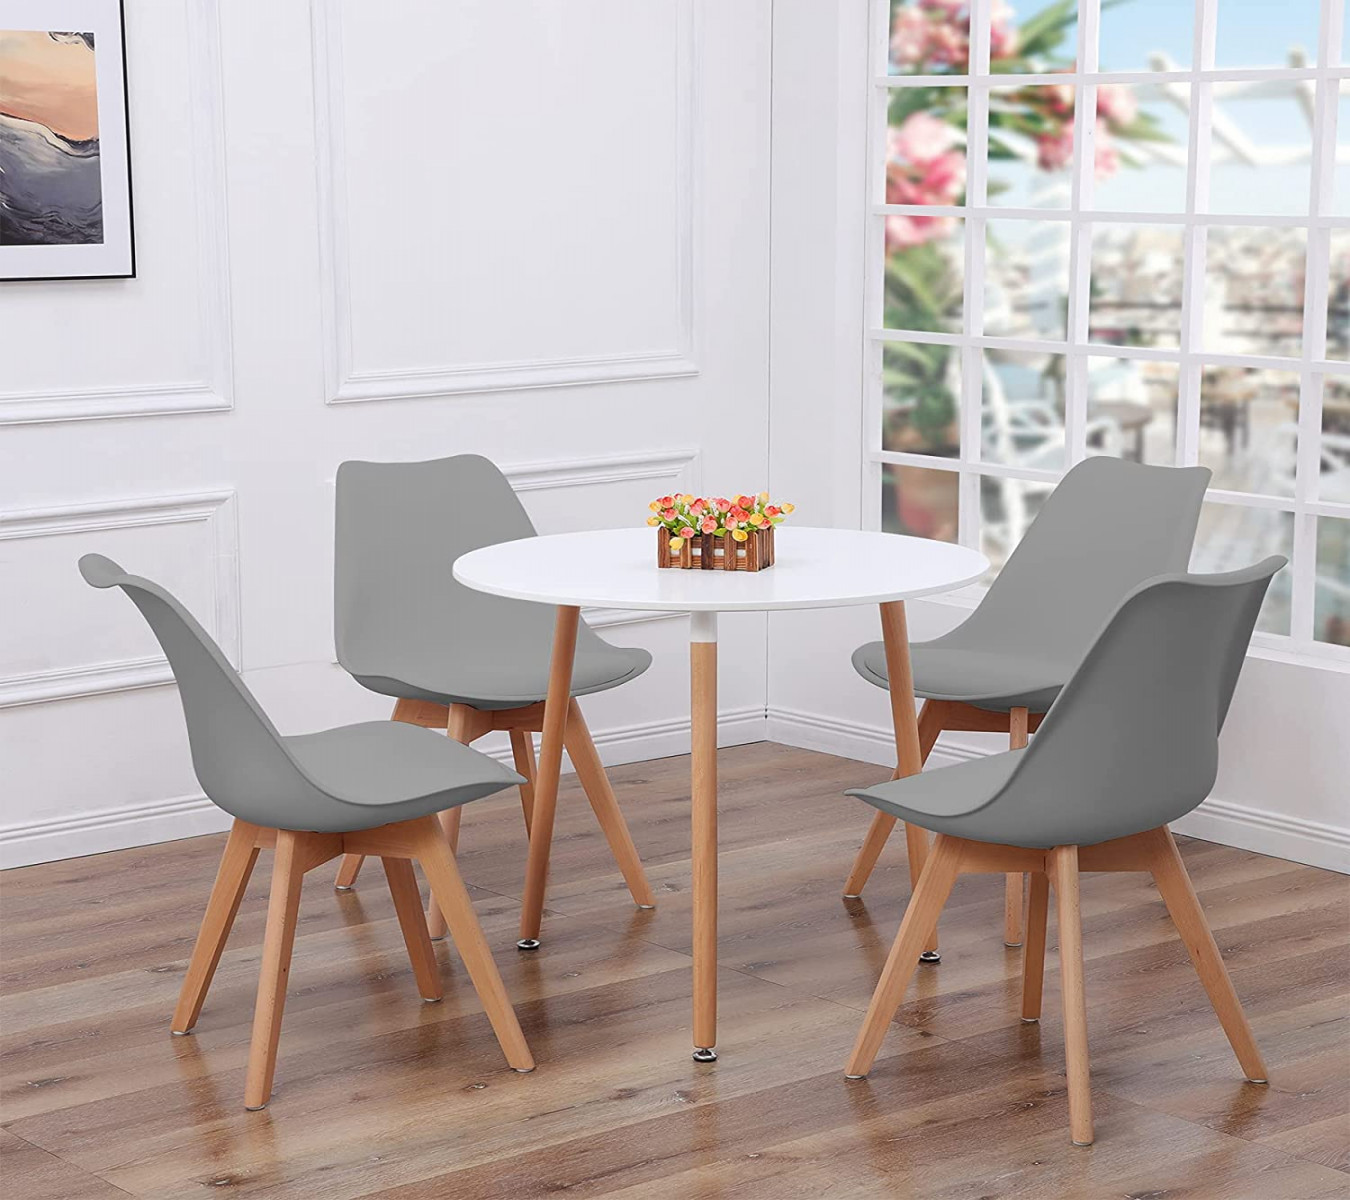 Dorafair Furniture Set - Round Dining Table and  Scandinavian Chairs - for  Kitchen, Dining Room or Office